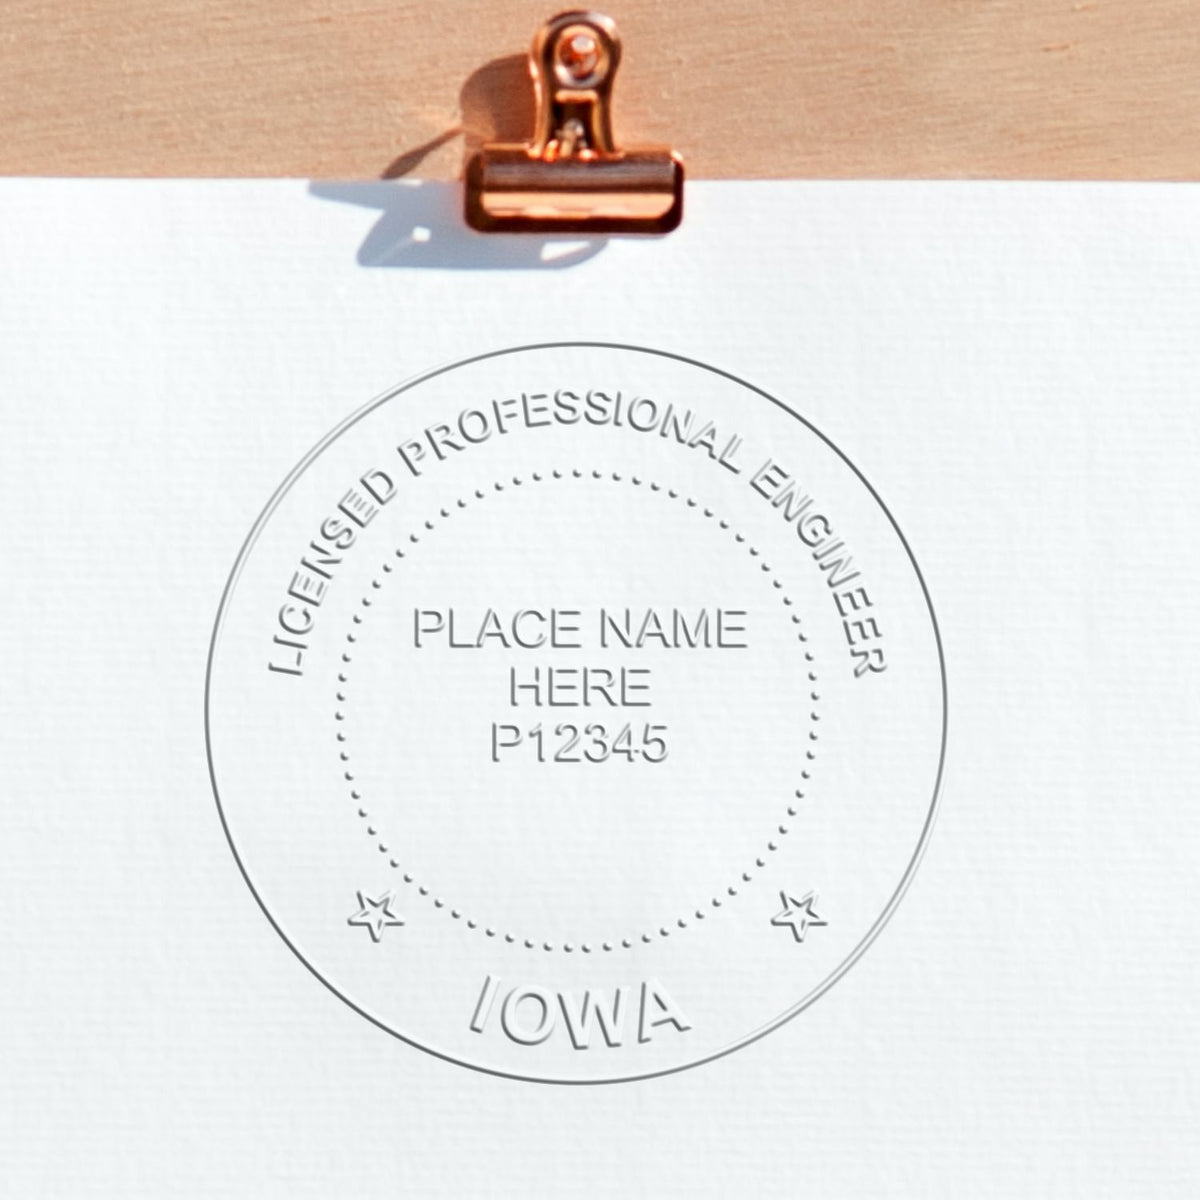 A photograph of the Hybrid Iowa Engineer Seal stamp impression reveals a vivid, professional image of the on paper.